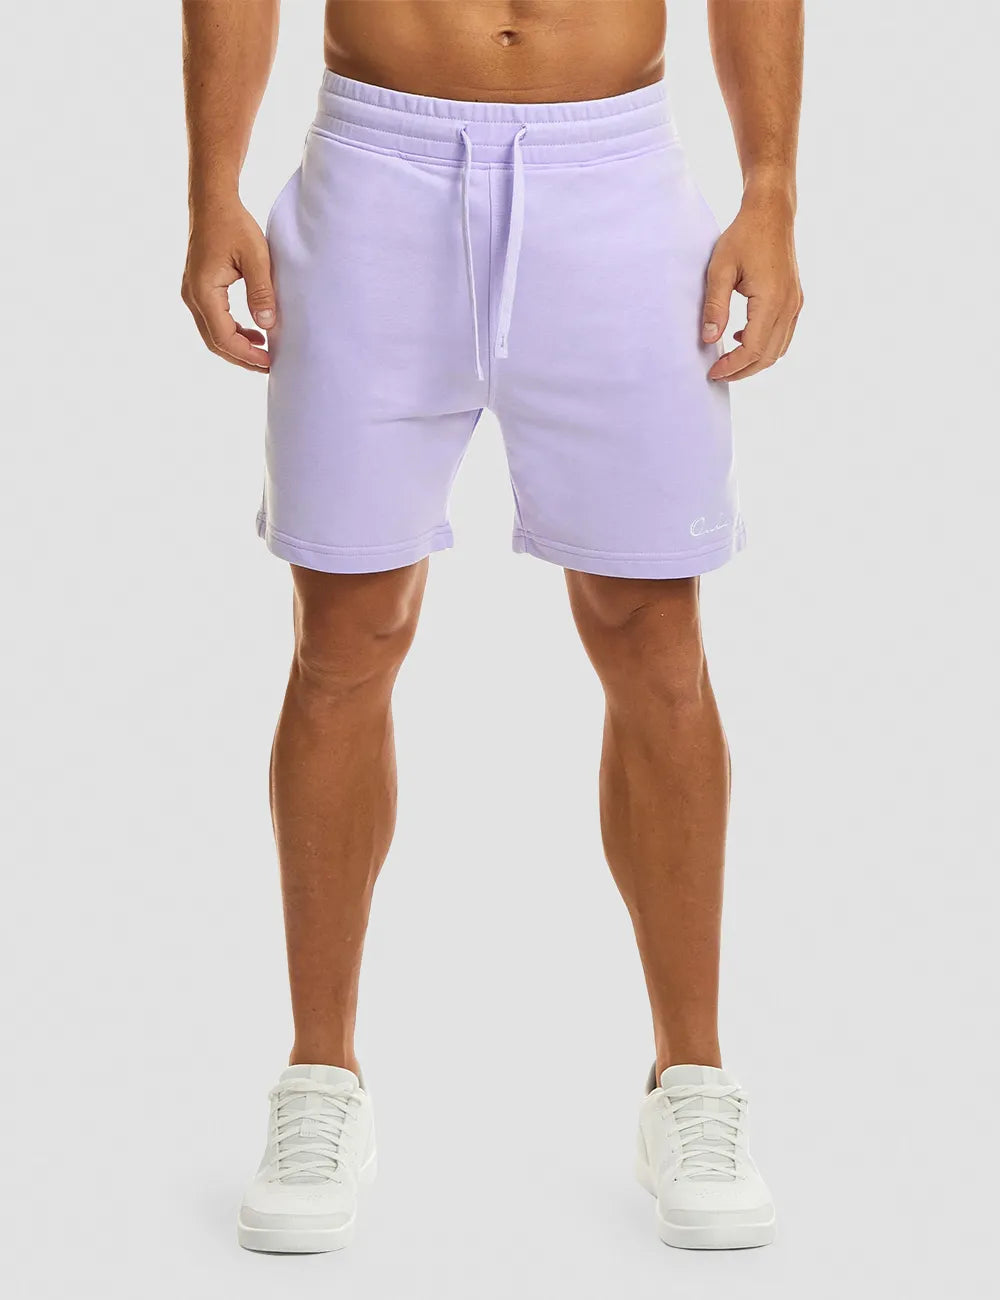 Cotton Steady State Short 6" - Blue